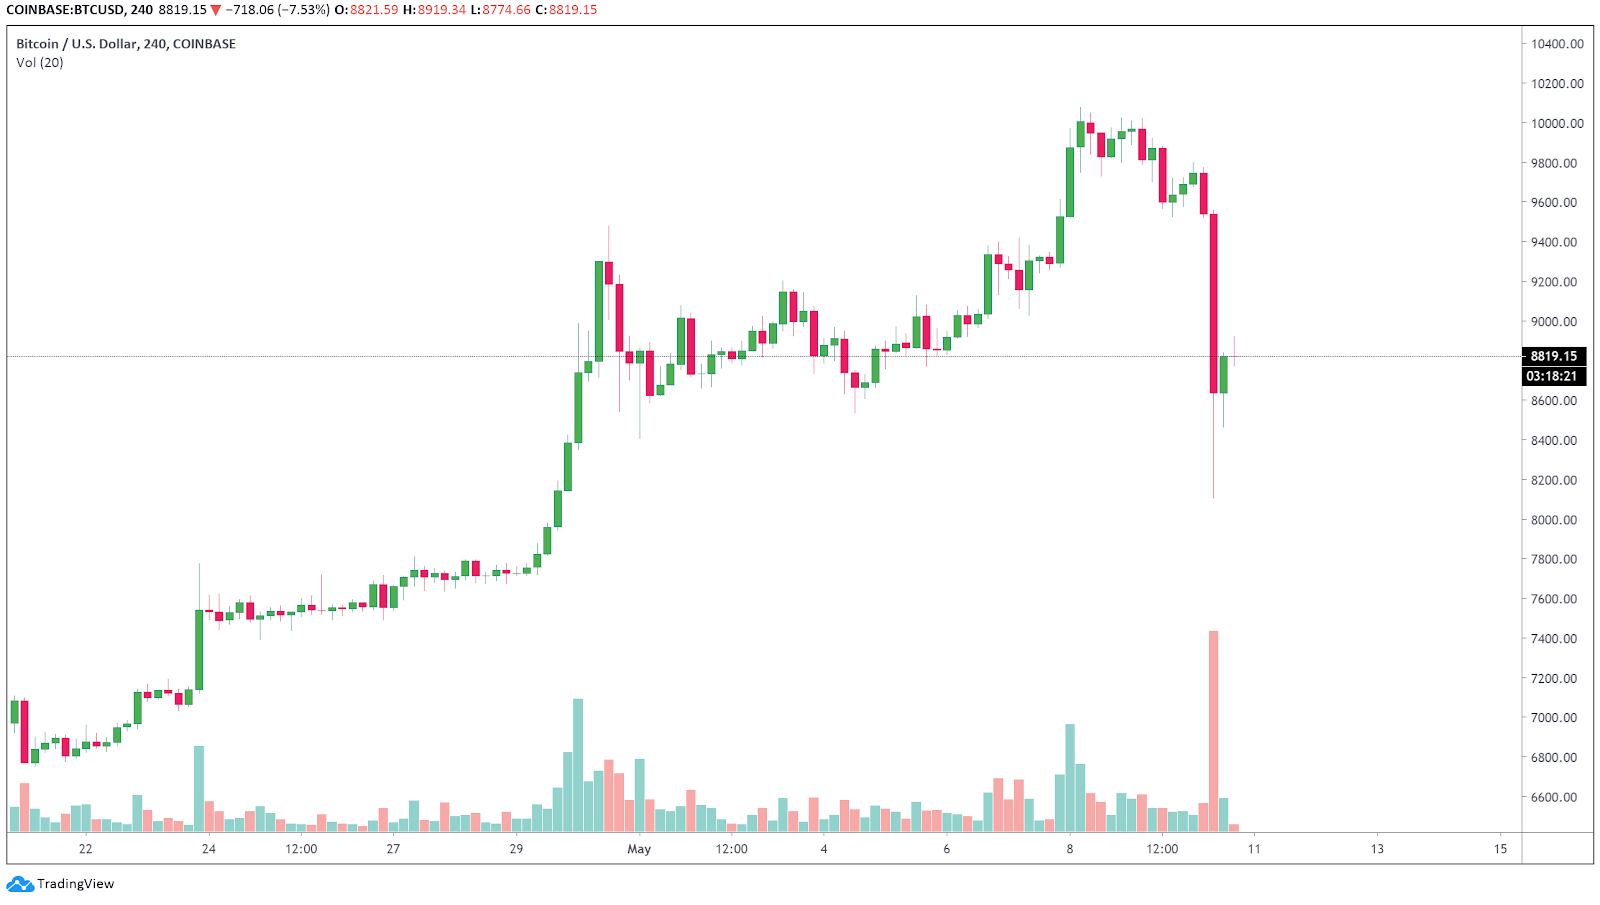 Bitcoin rejects $10,000 ahead of halving